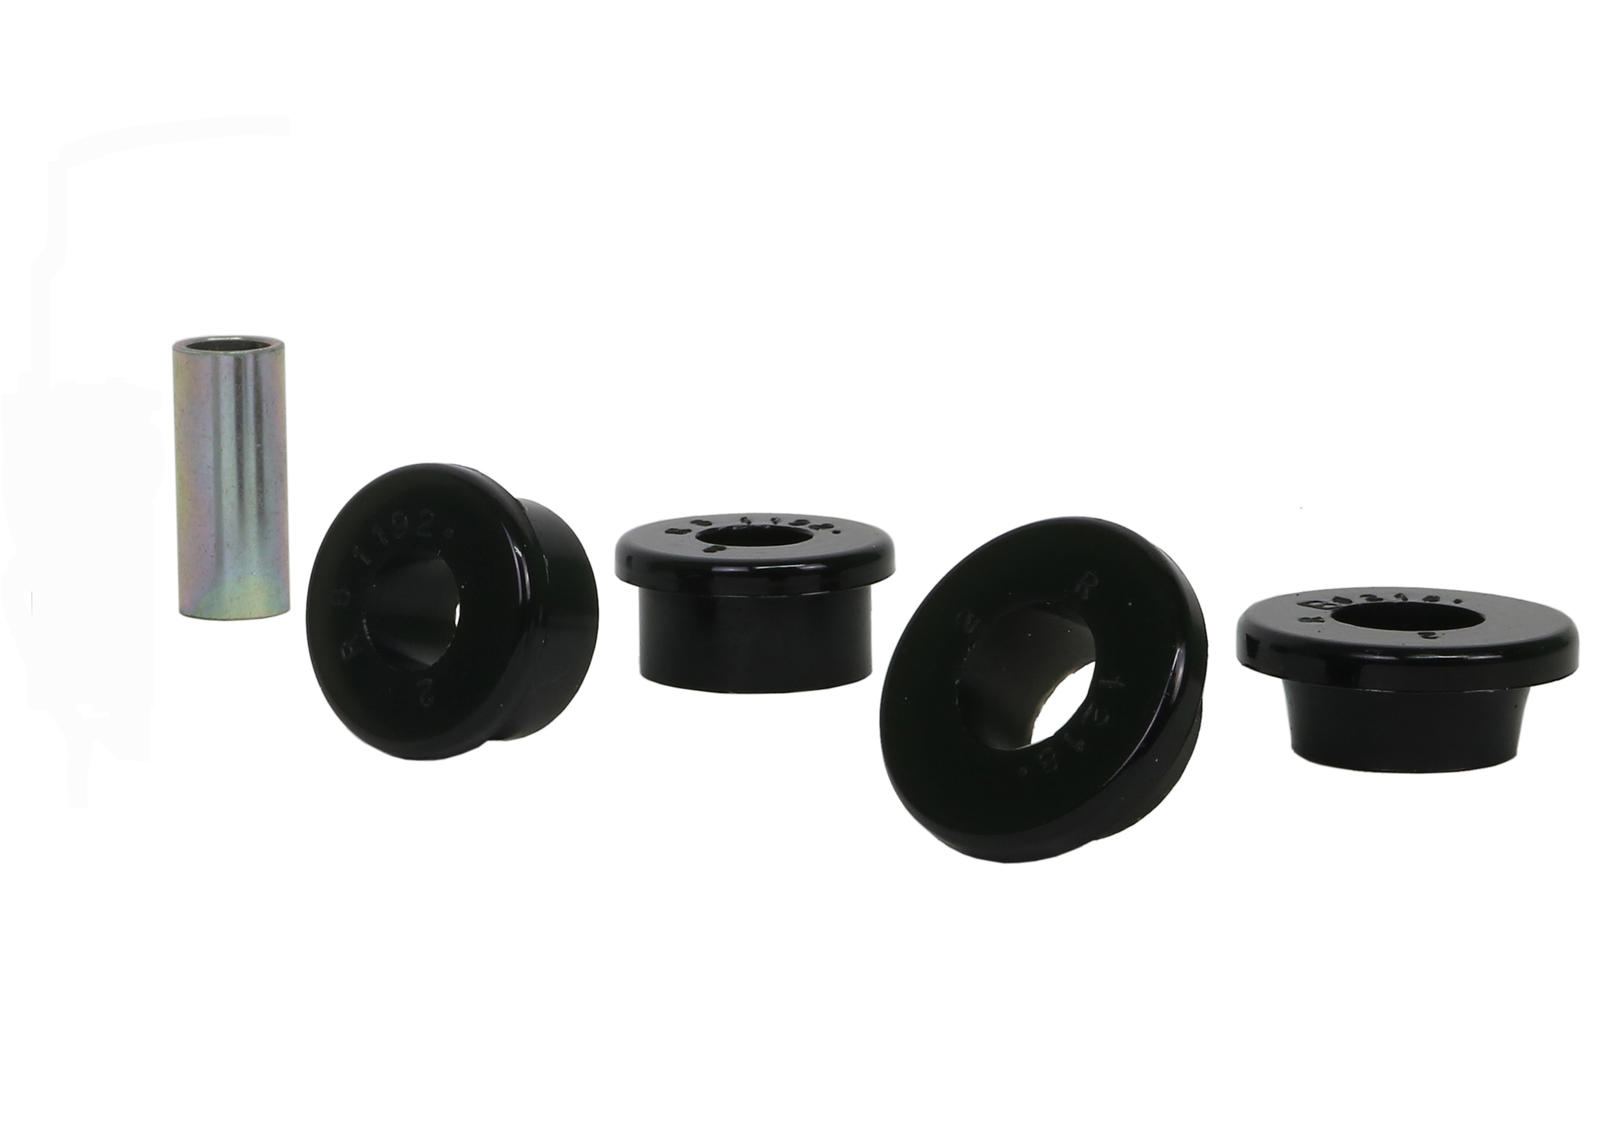 Rear Panhard Rod - Bushing Kit to Suit Toyota Corolla, Celica and Cressida